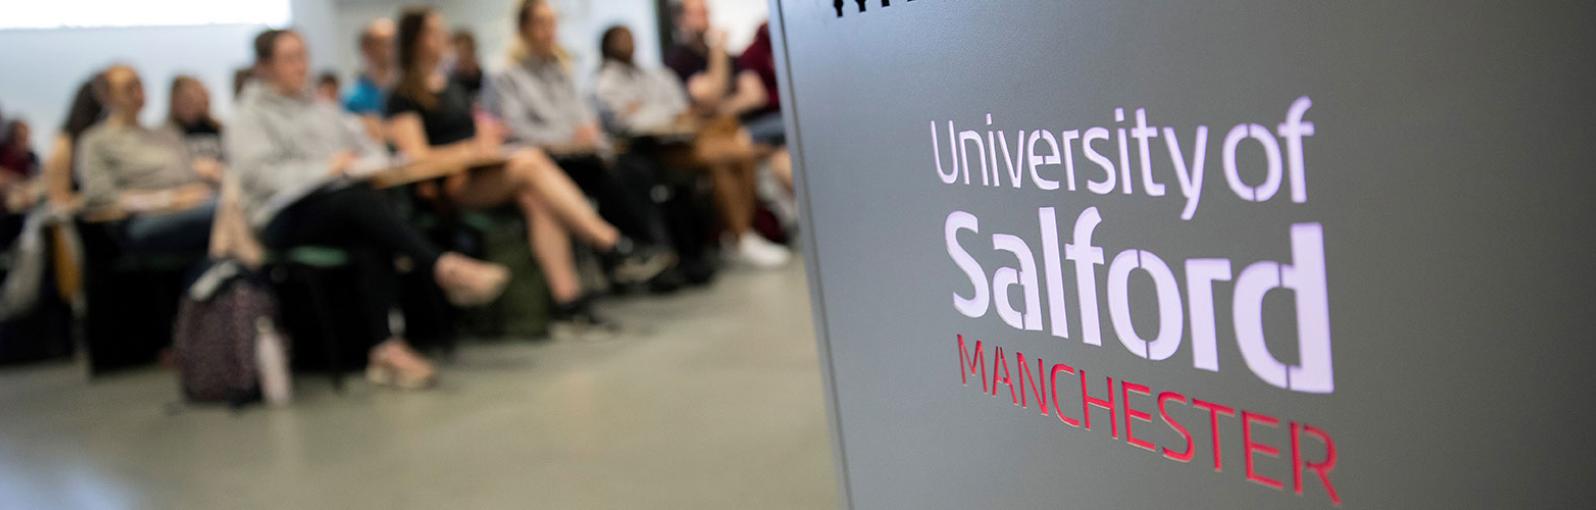 University of Salford lecture podium with students in the background